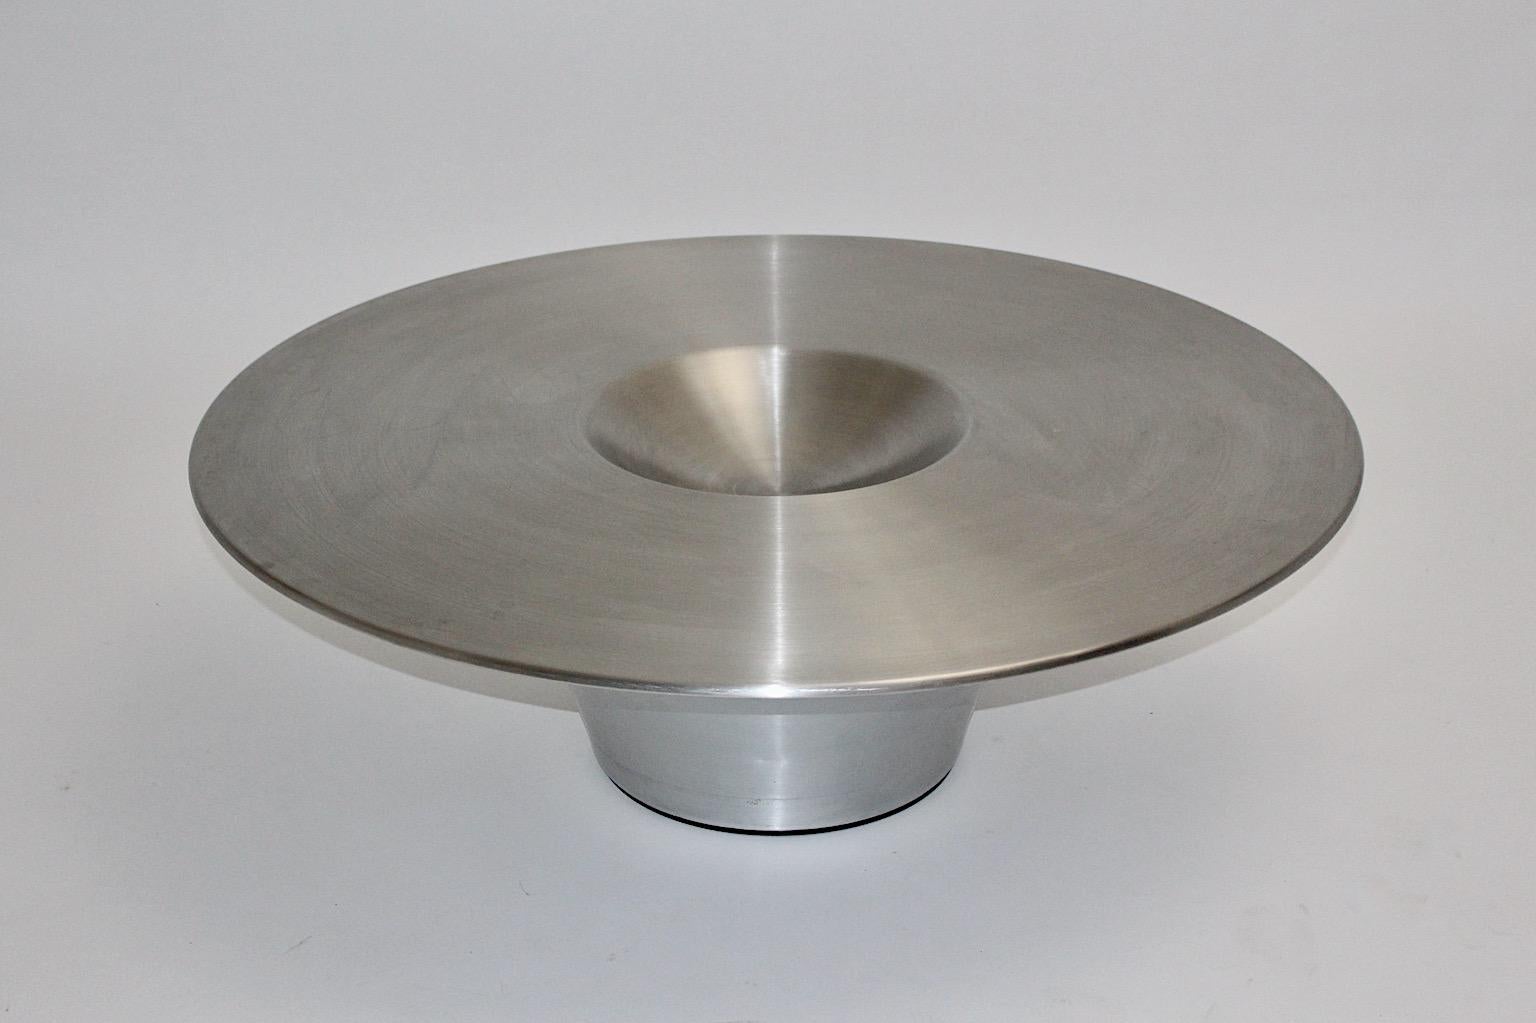 Modern vintage coffee table or sofa table from aluminum stainless steel designed by Yasuhiro Shito 2002 for Cattelan, Italy.
A great sleek shape sofa table combined with the material aluminum shows this coffee table for the refined taste.
This